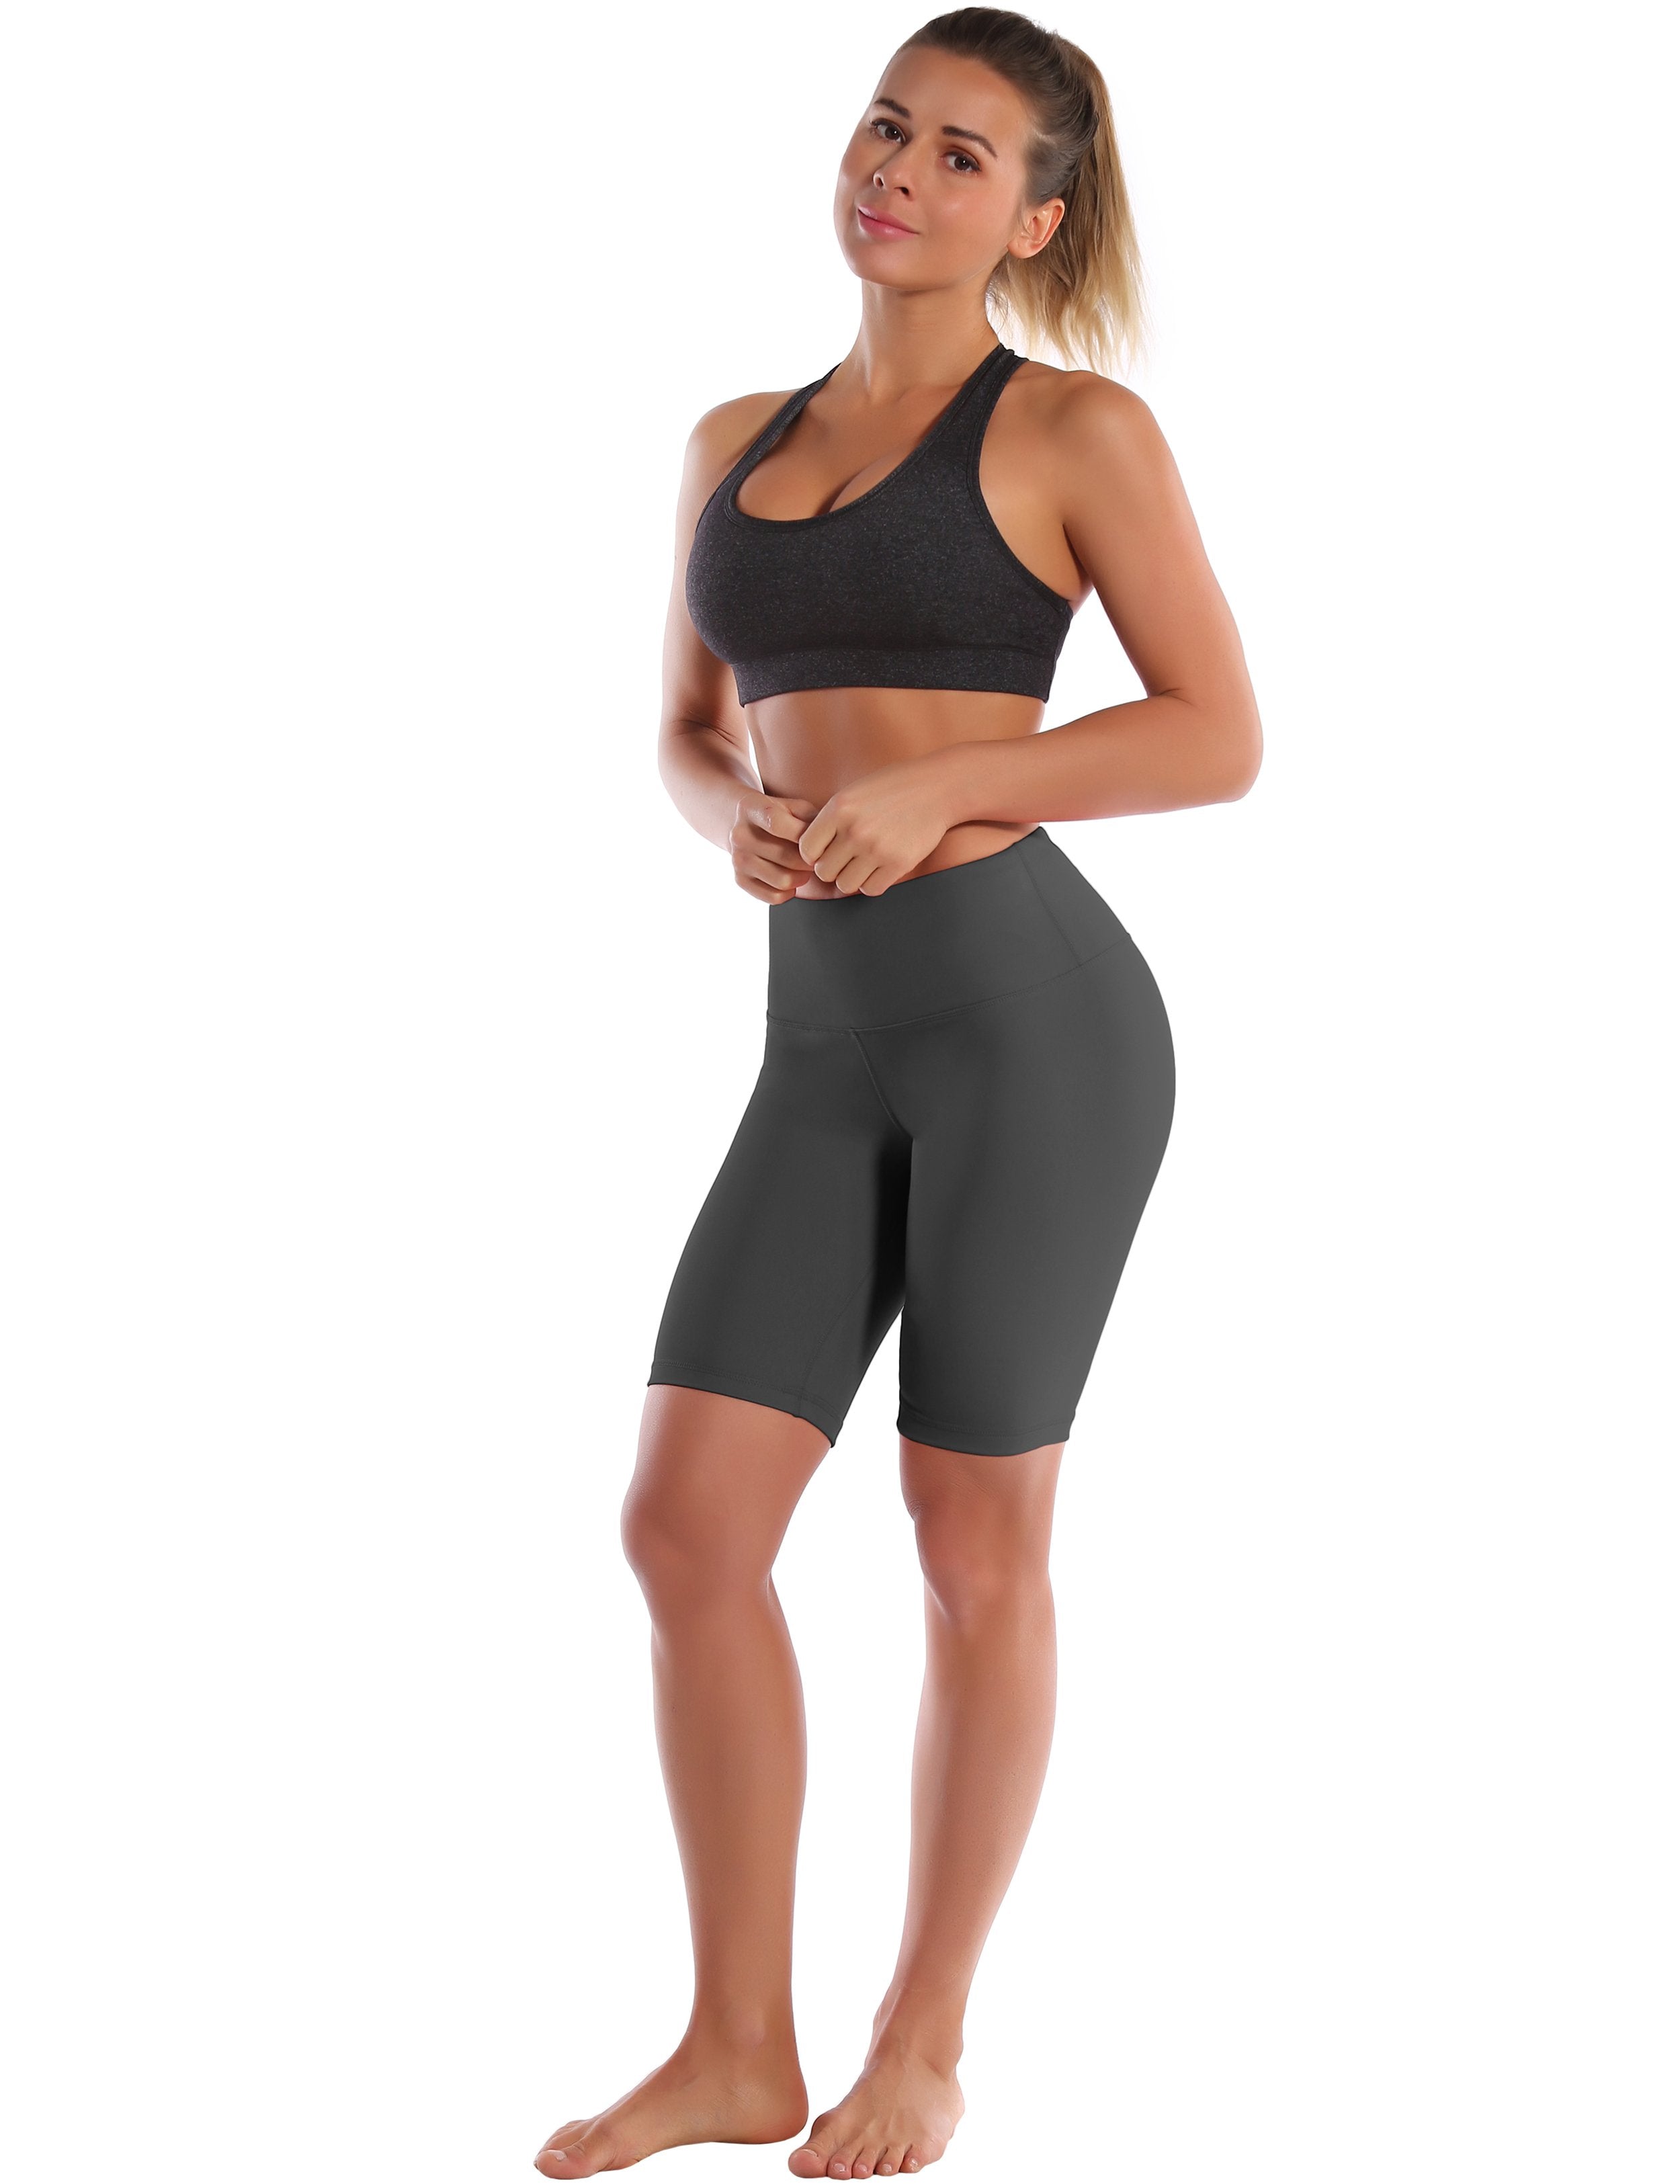 8" High Waist Jogging Shorts shadowcharcoal Sleek, soft, smooth and totally comfortable: our newest style is here. Softest-ever fabric High elasticity High density 4-way stretch Fabric doesn't attract lint easily No see-through Moisture-wicking Machine wash 75% Nylon, 25% Spandex